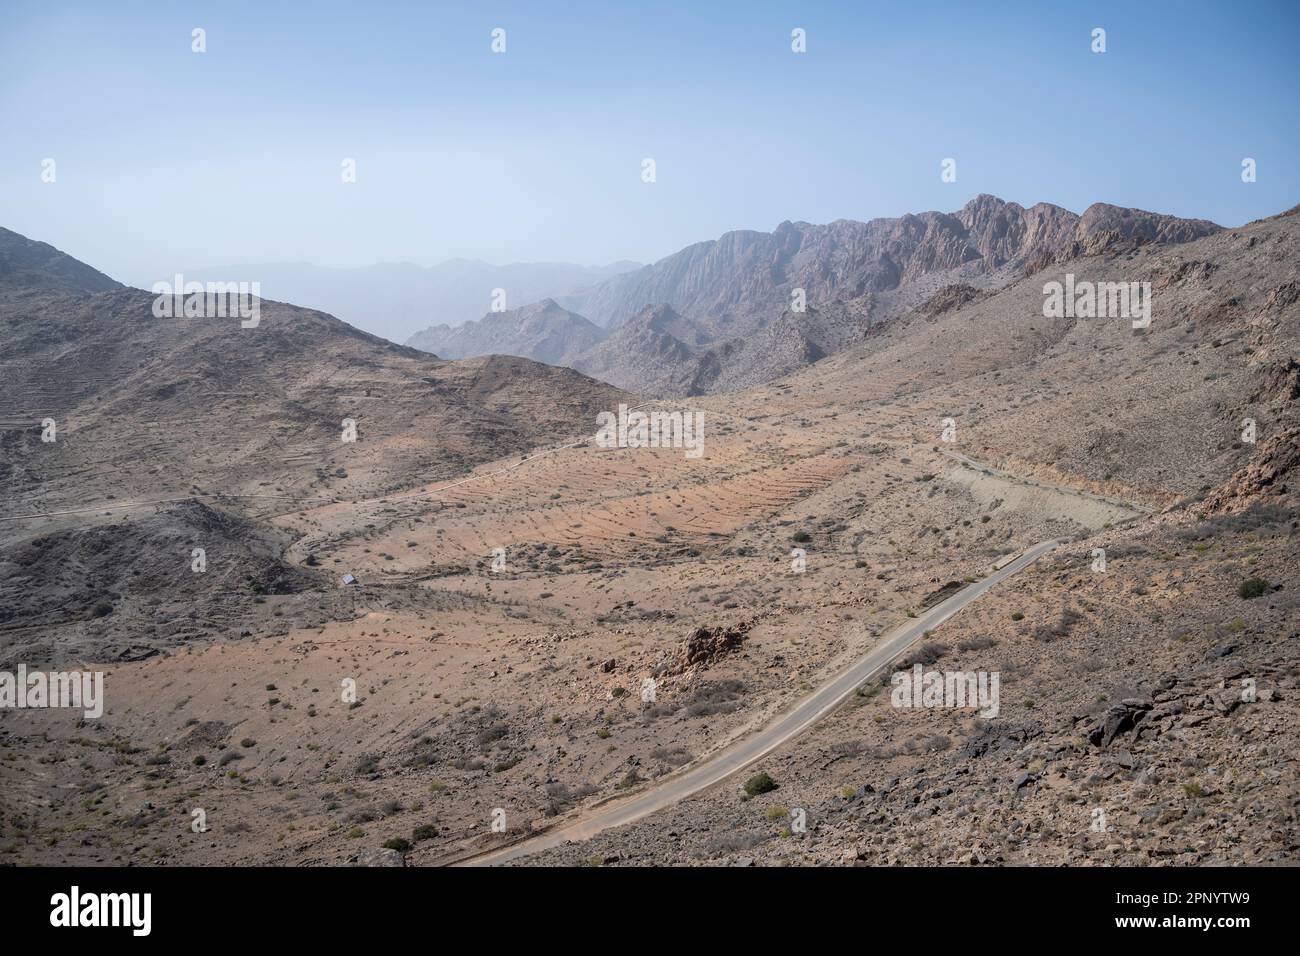 Mountain pass on the road to Tafraout. Stock Photo